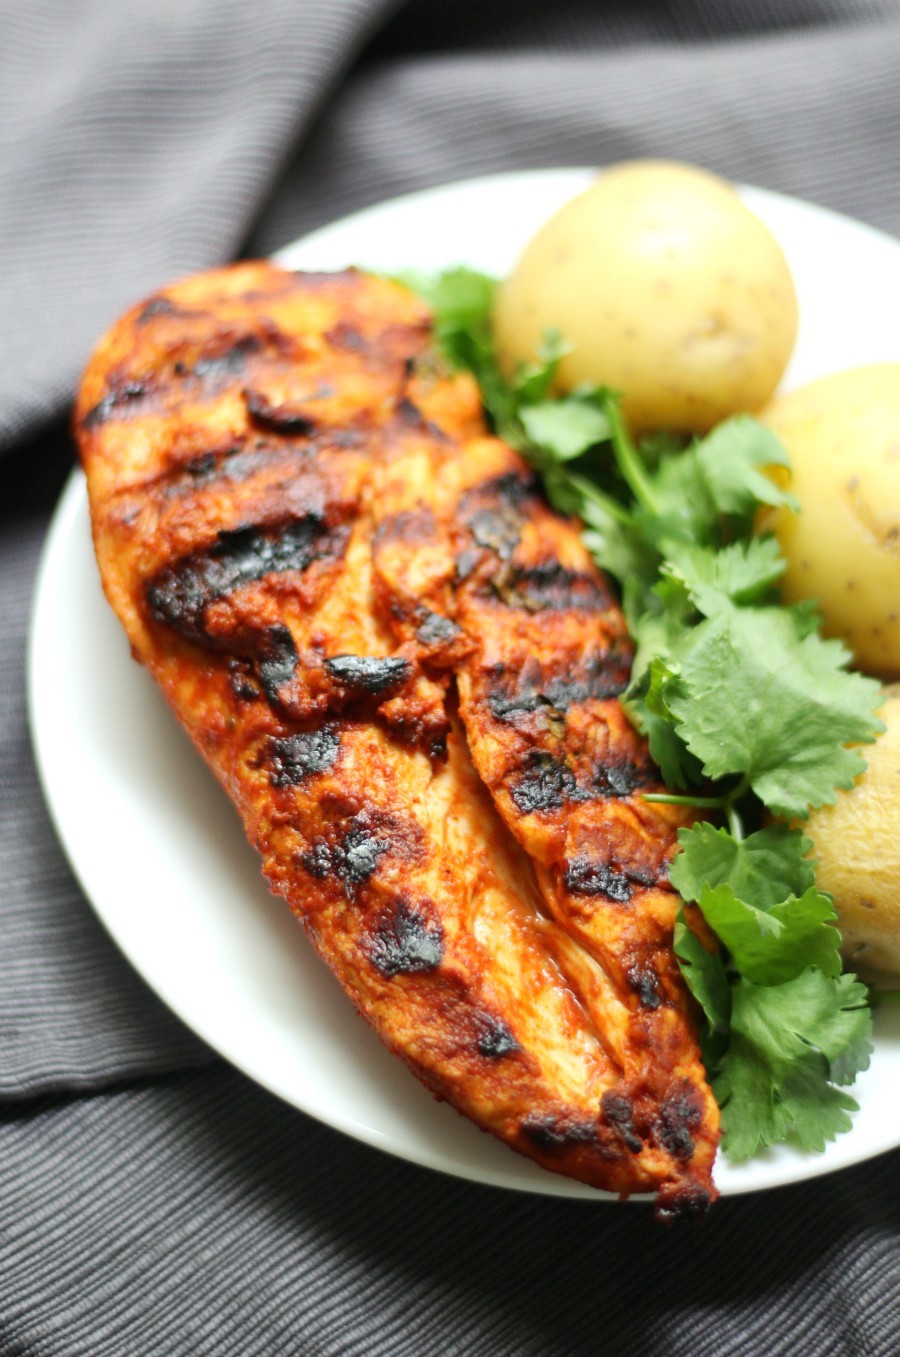 Grilled Peri-Peri Chicken (Gluten-Free, Paleo, Allergy-Free) | Strength and Sunshine @RebeccaGF666 A spicy North African recipe that will take your plain grilled chicken up a notch! Marinated in a spicy, zesty sauce, this Grilled Peri-Peri Chicken is loaded with flavor, gluten-free, paleo, top 8 allergy-free, and perfect for any cookout, bbq, or dinner! 